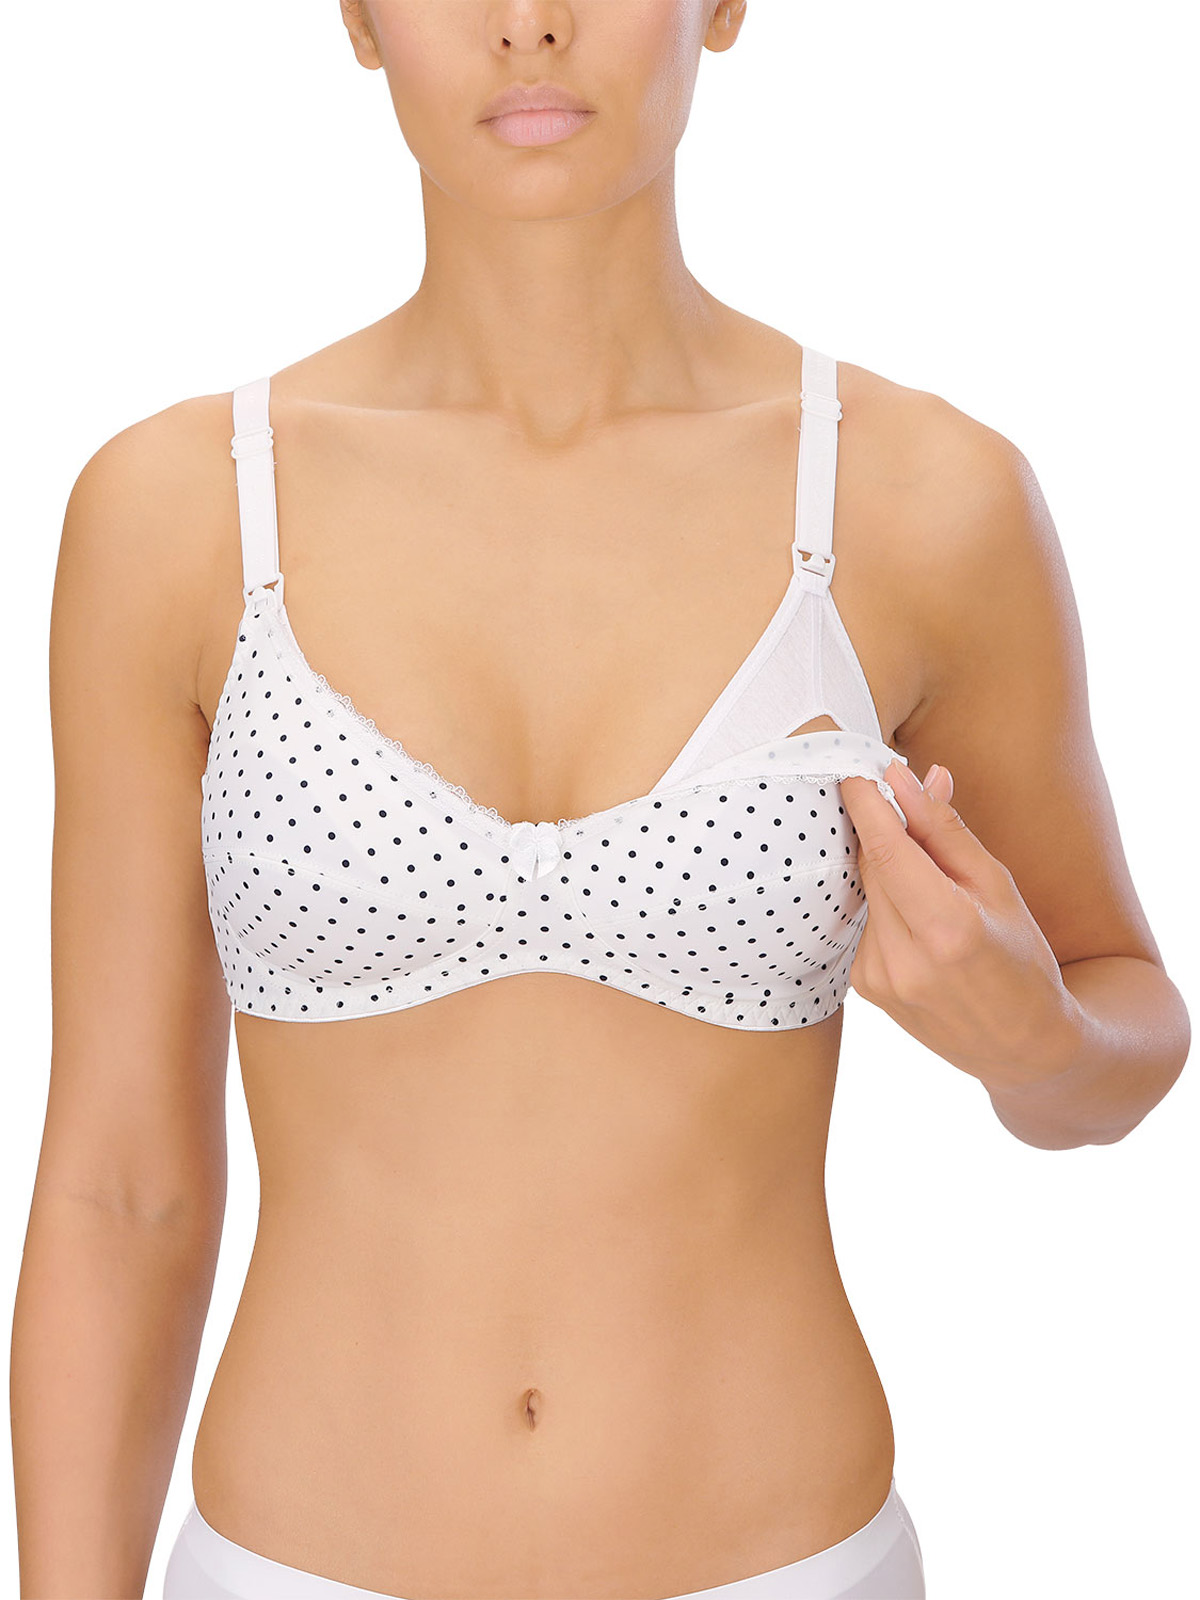 Naturana Firm Support Soft Cup Plus Size Bra - Basics by Mail